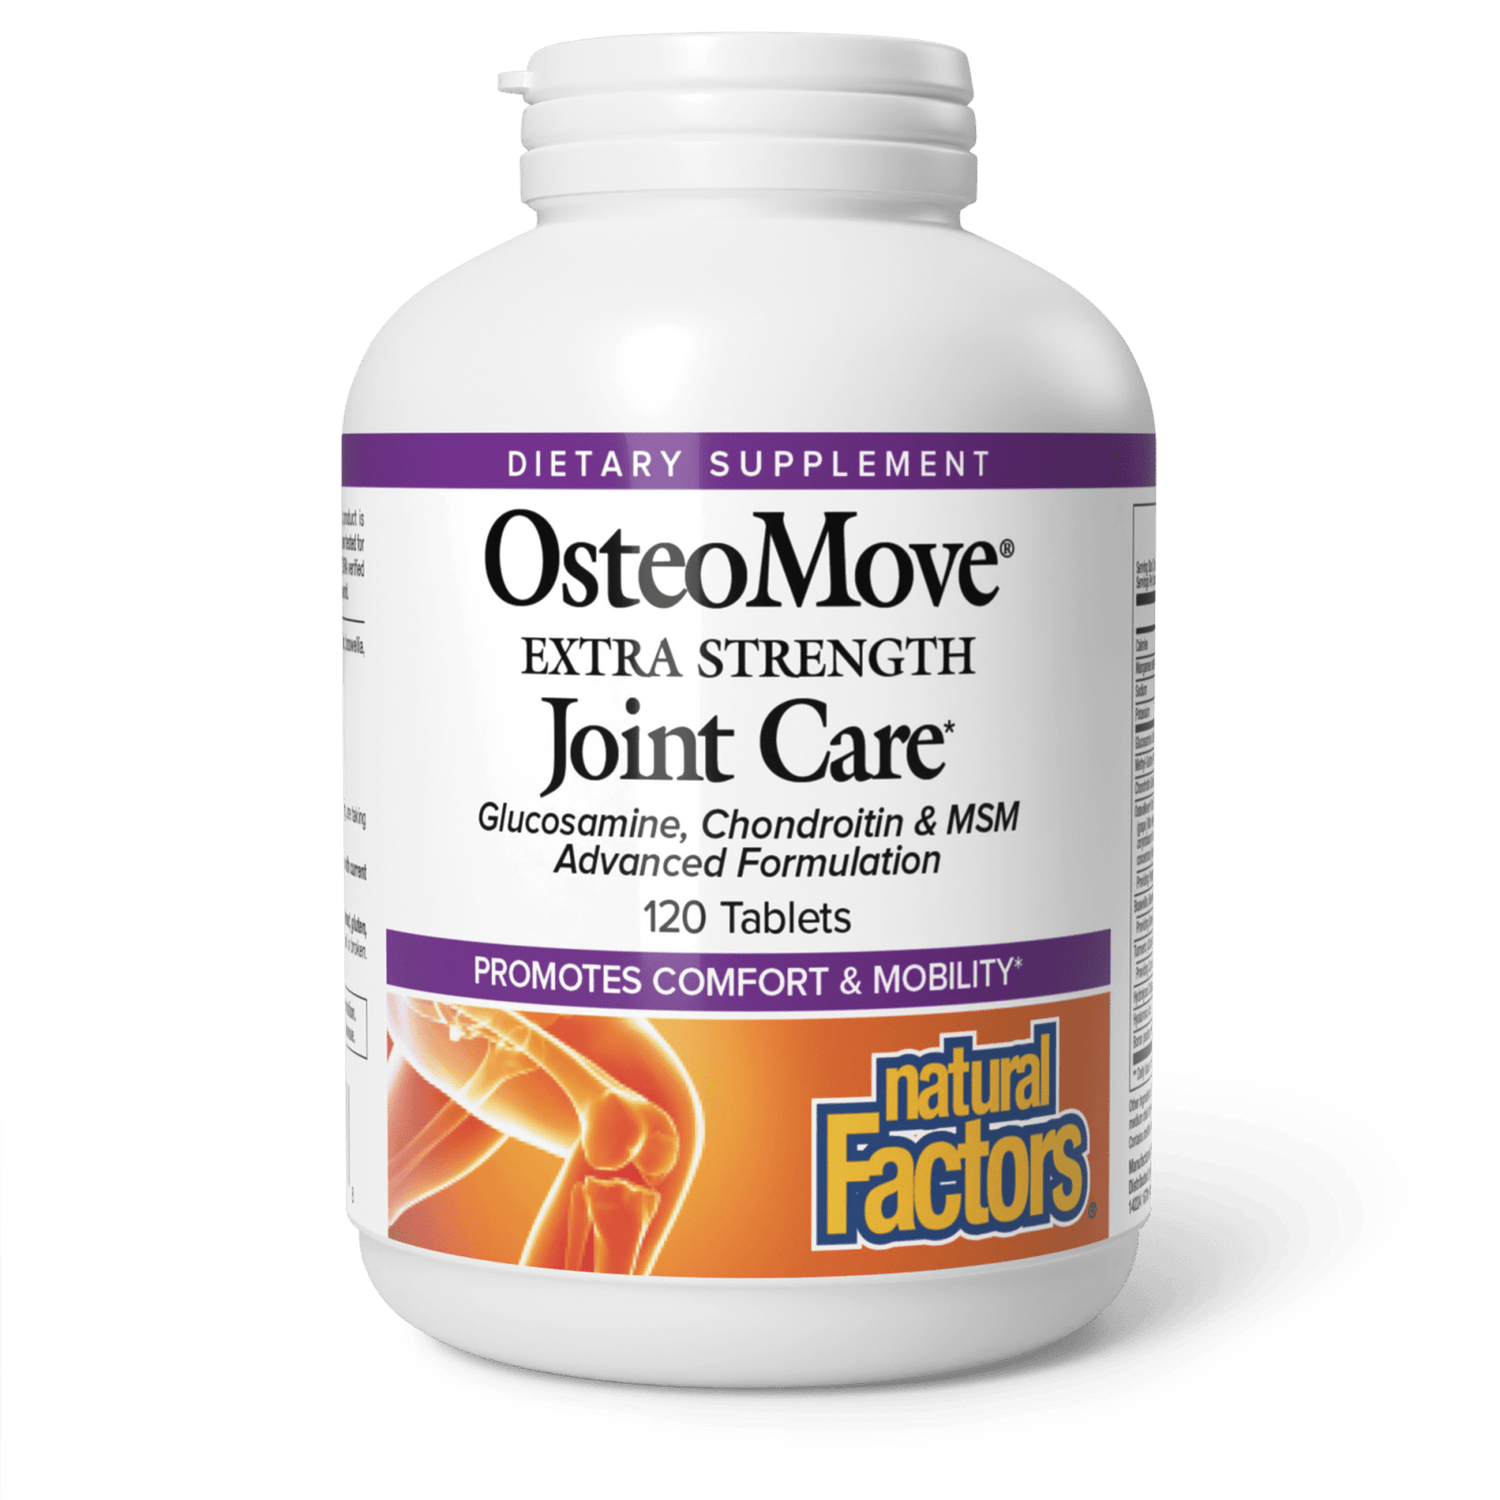 OsteoMove® Extra Strength Joint Care*|variant|hi-res|2684U